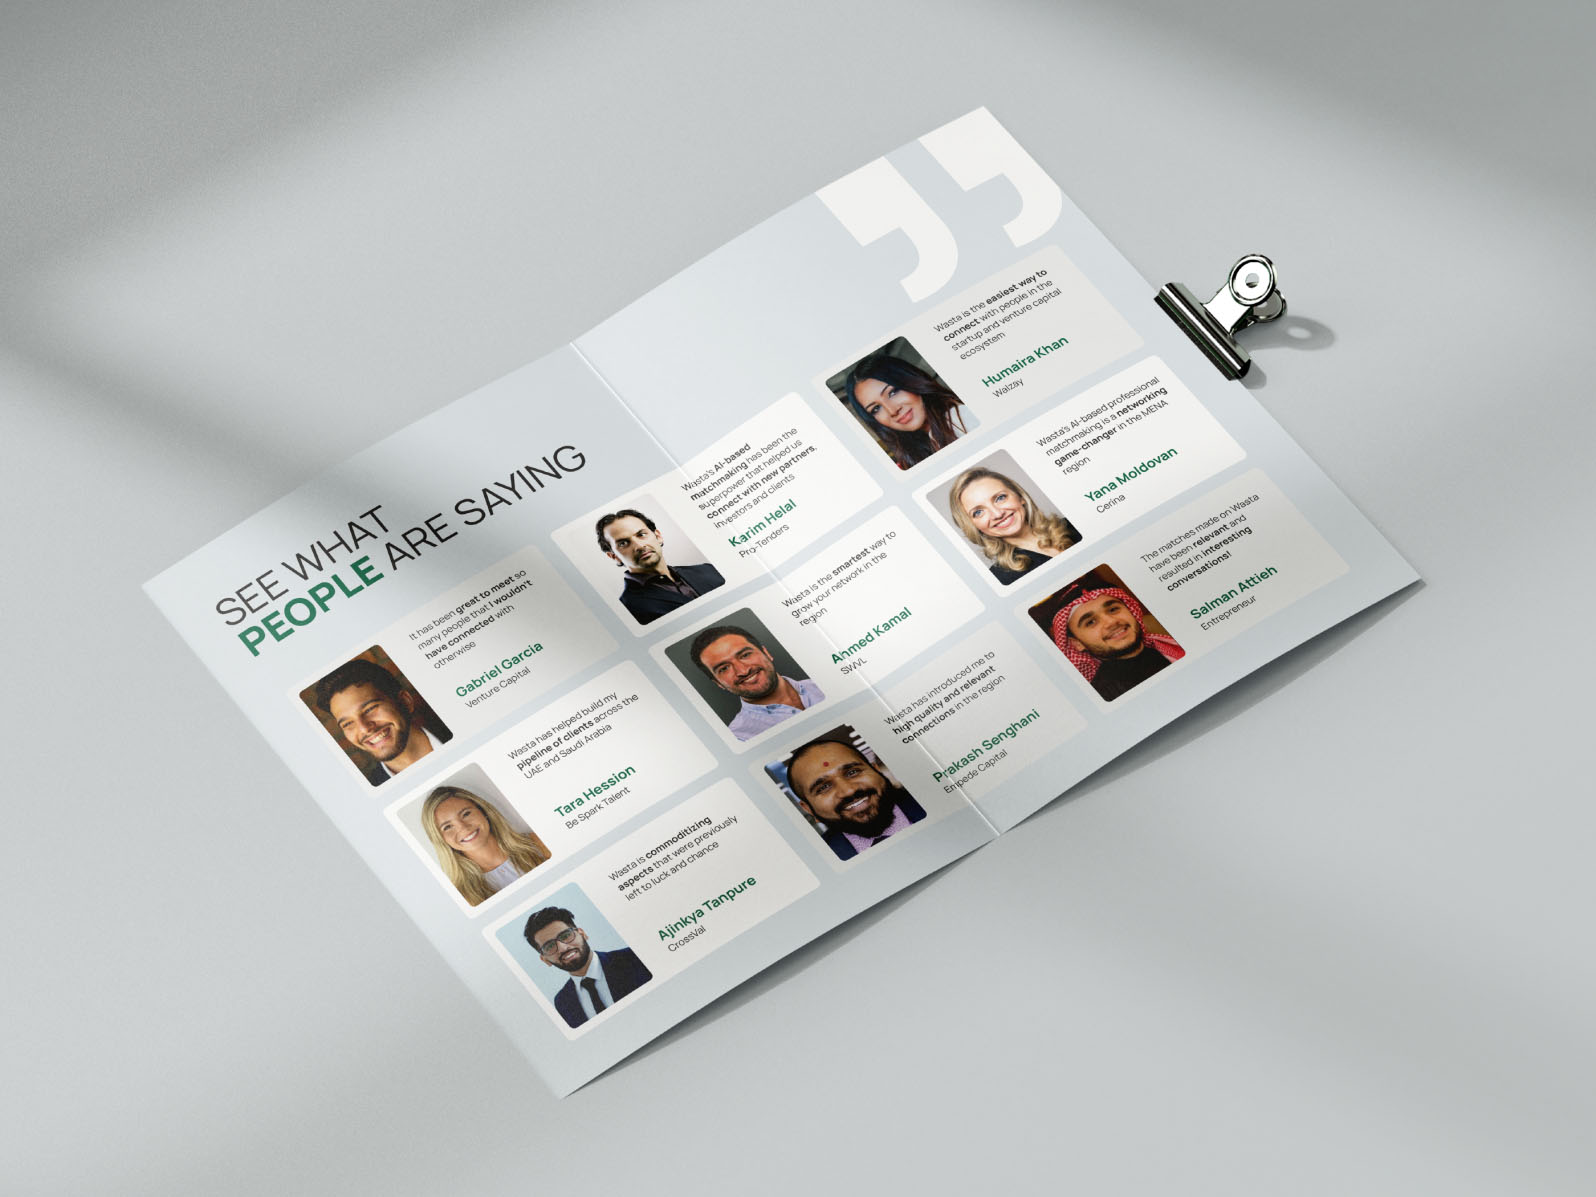 Company brochure with testimonials as the main content.